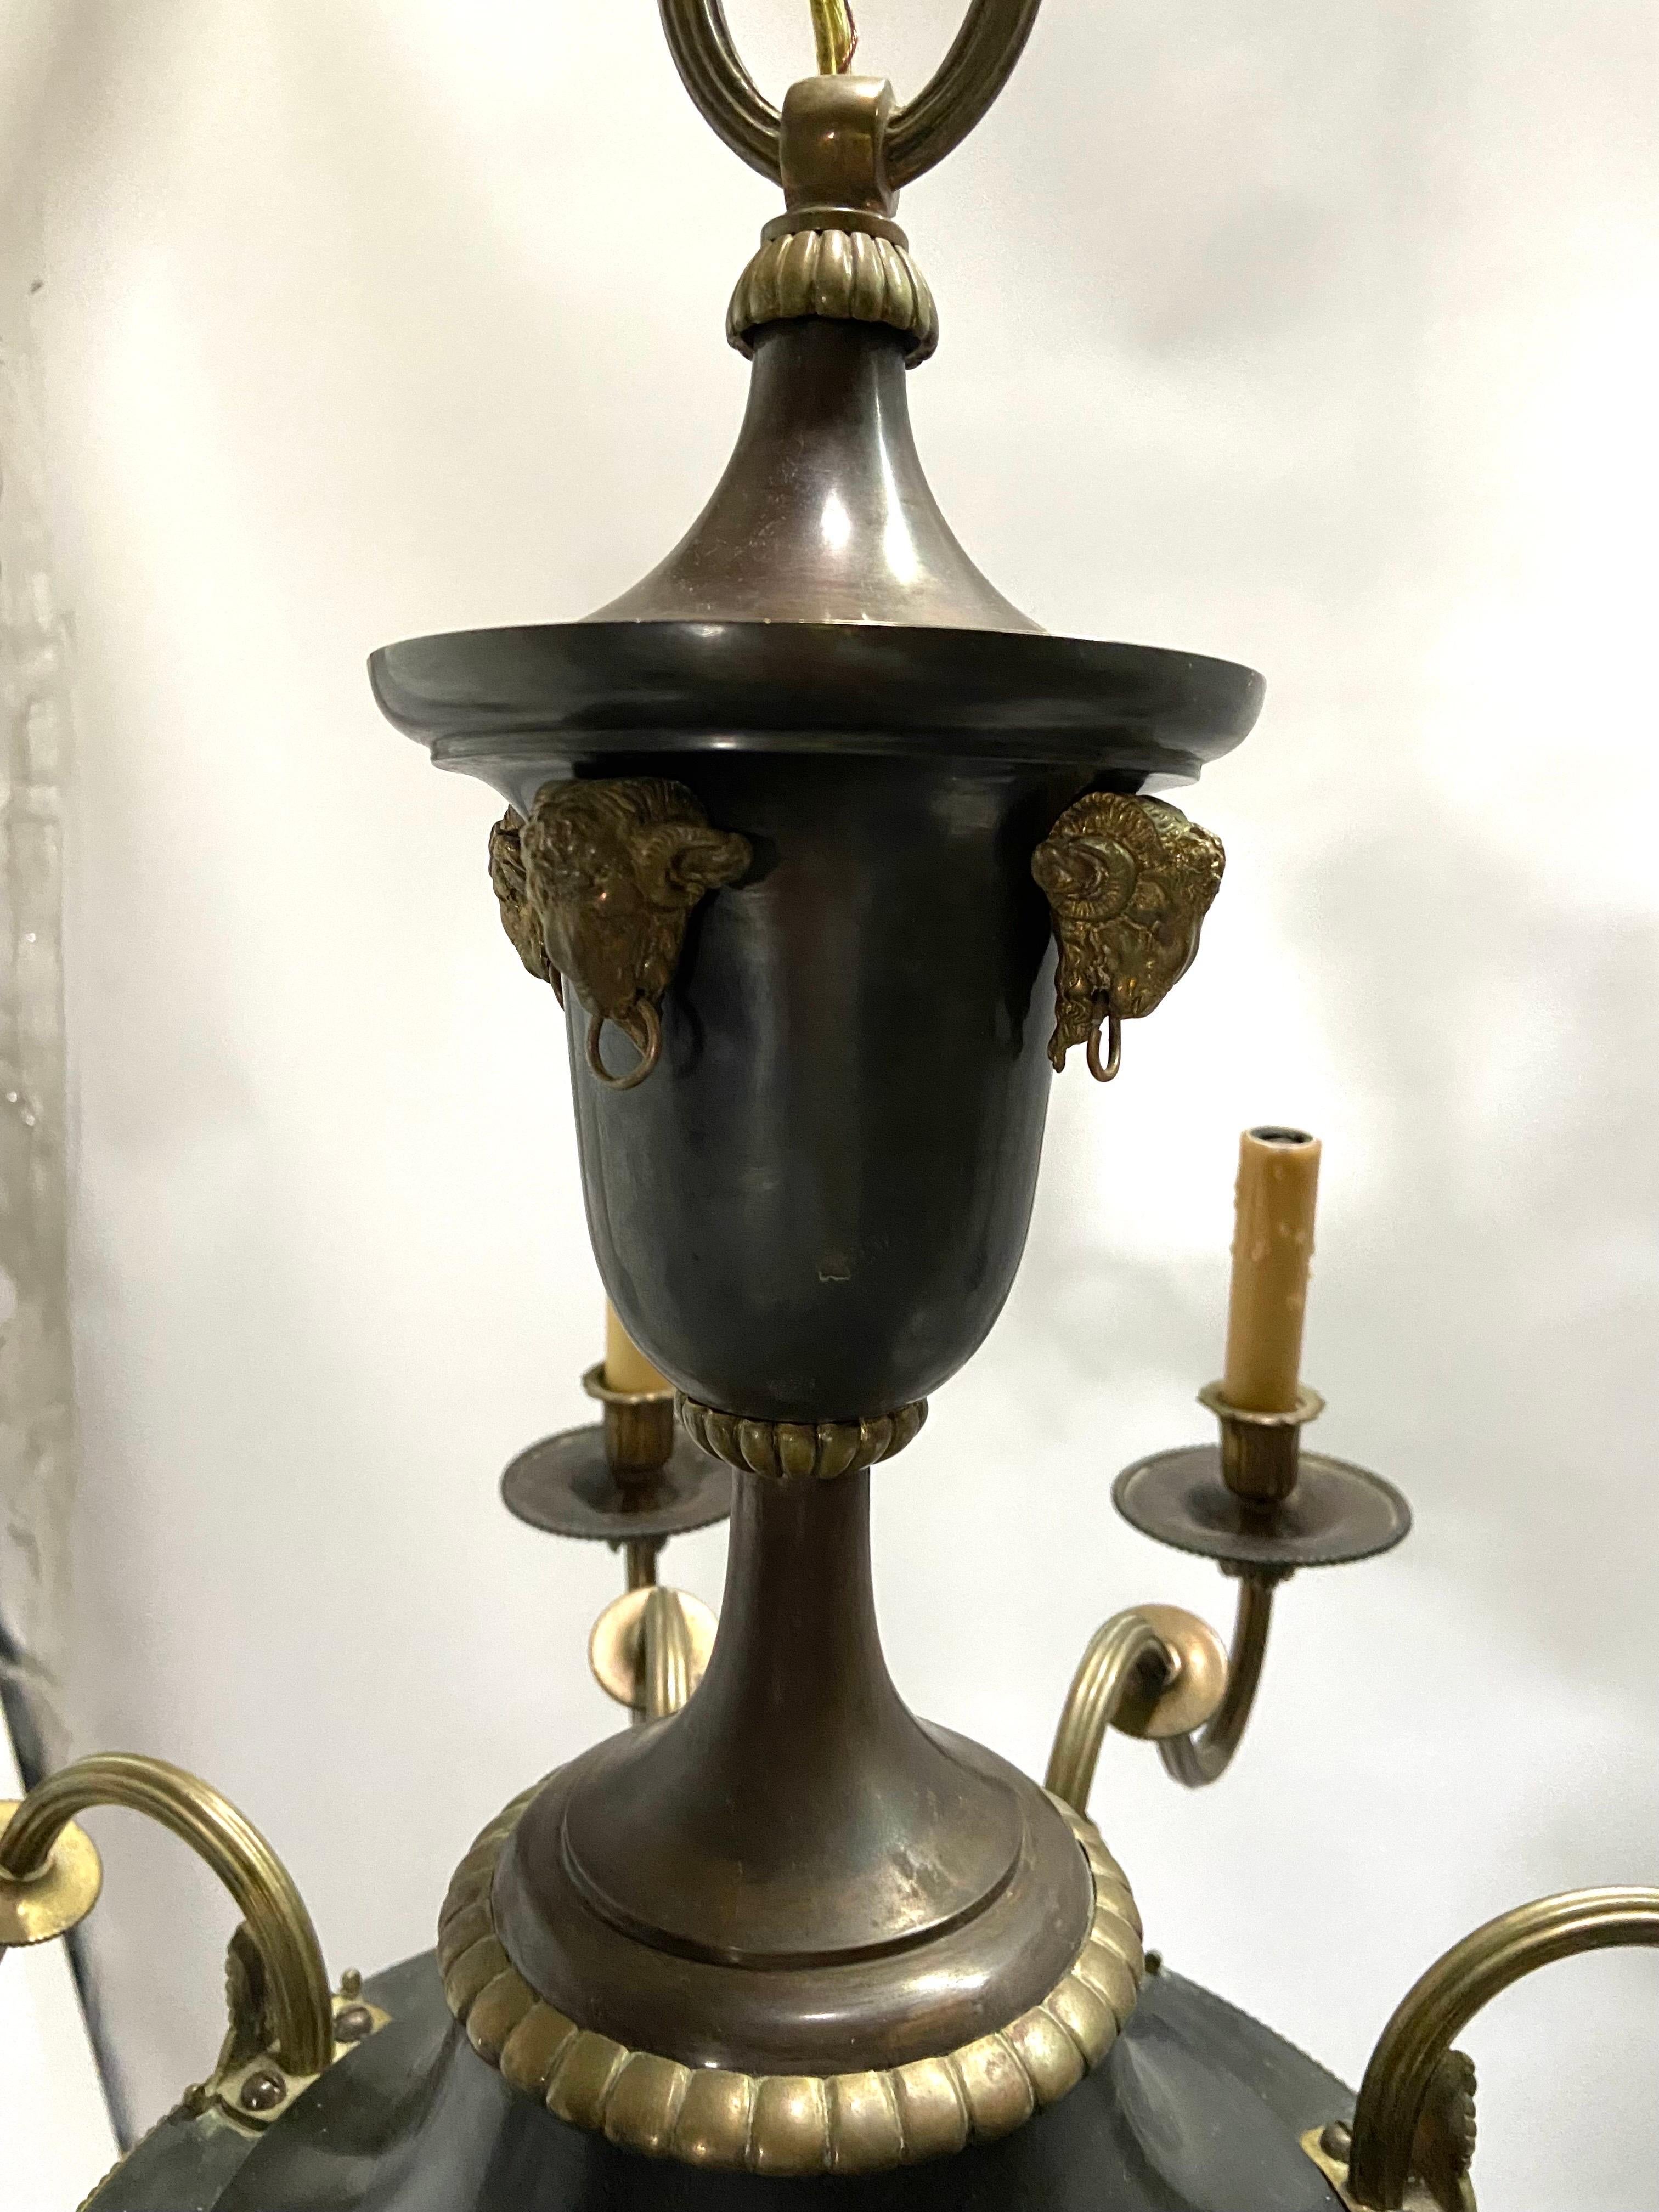 An antique, circa 1900 - 1920, French Empire style eight arm bronze chandelier with ram’s head details. This eight light chandelier has scroll and acanthus leaf details at each fluted and curved arm. The bobeches have a faceted underside and a